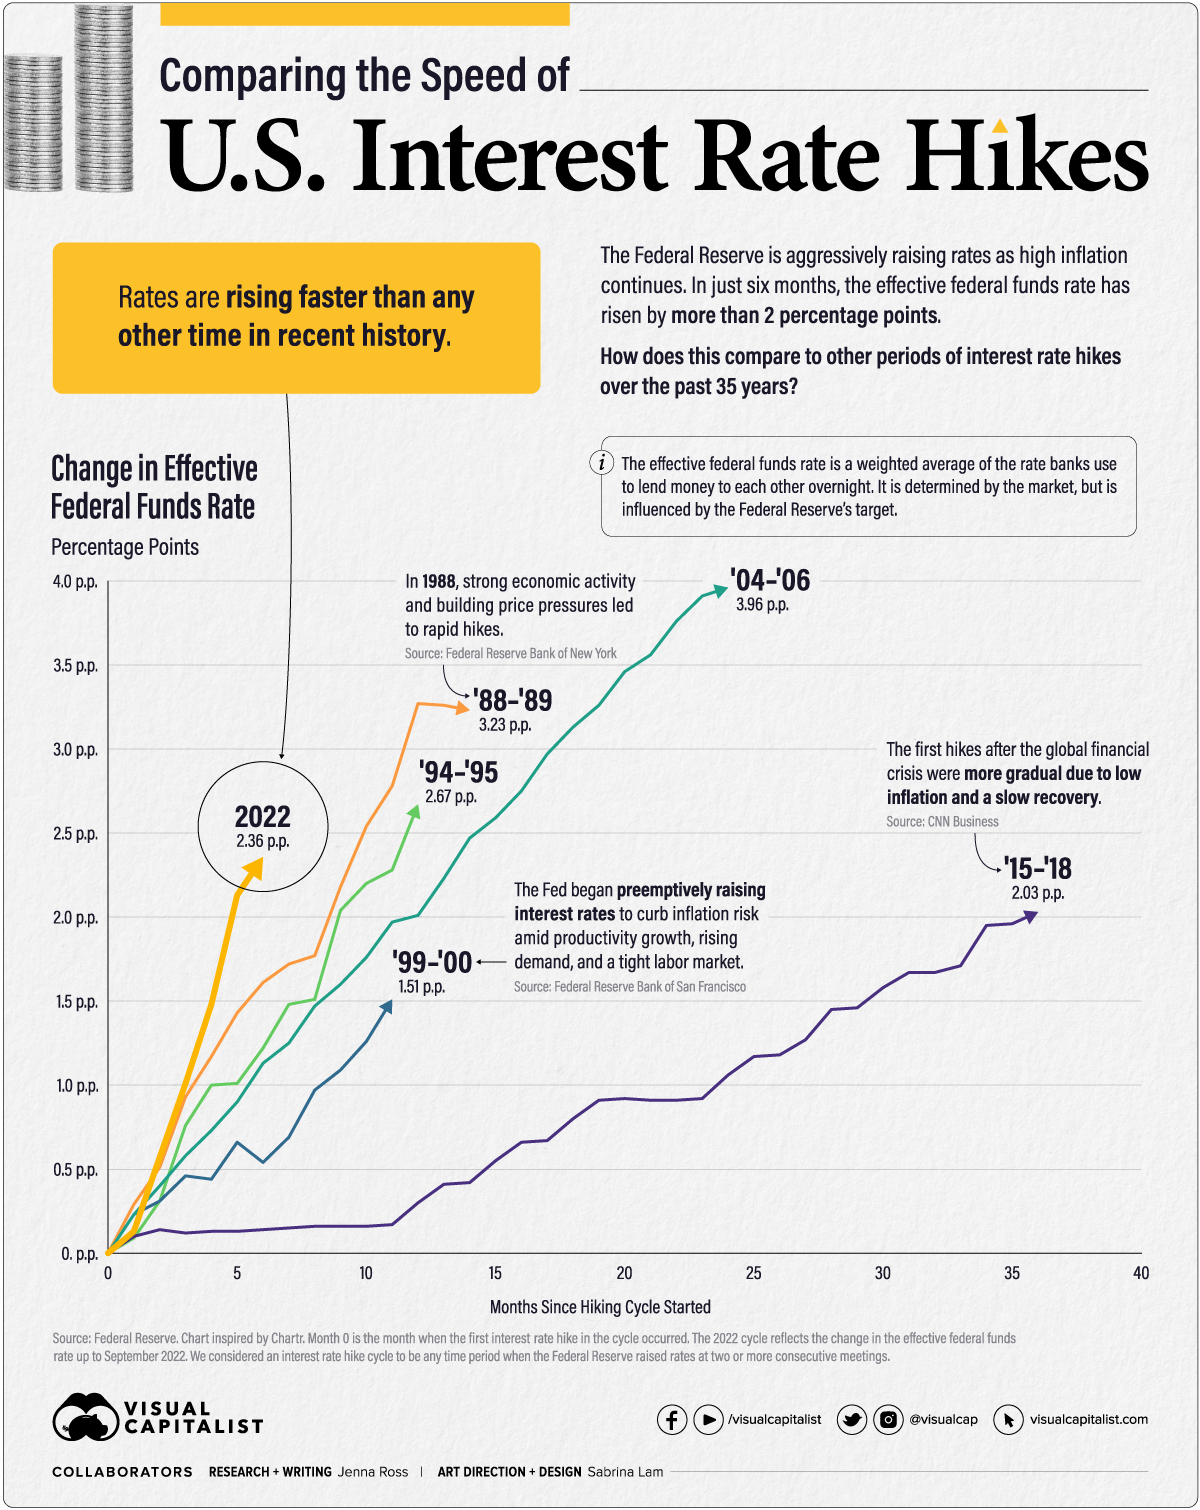 Line chart comparing the speed of interest rate hikes over cycles since 1988. The 2022 cycle is the fastest with the effective federal funds rate rising 2.36 p.p. in six months